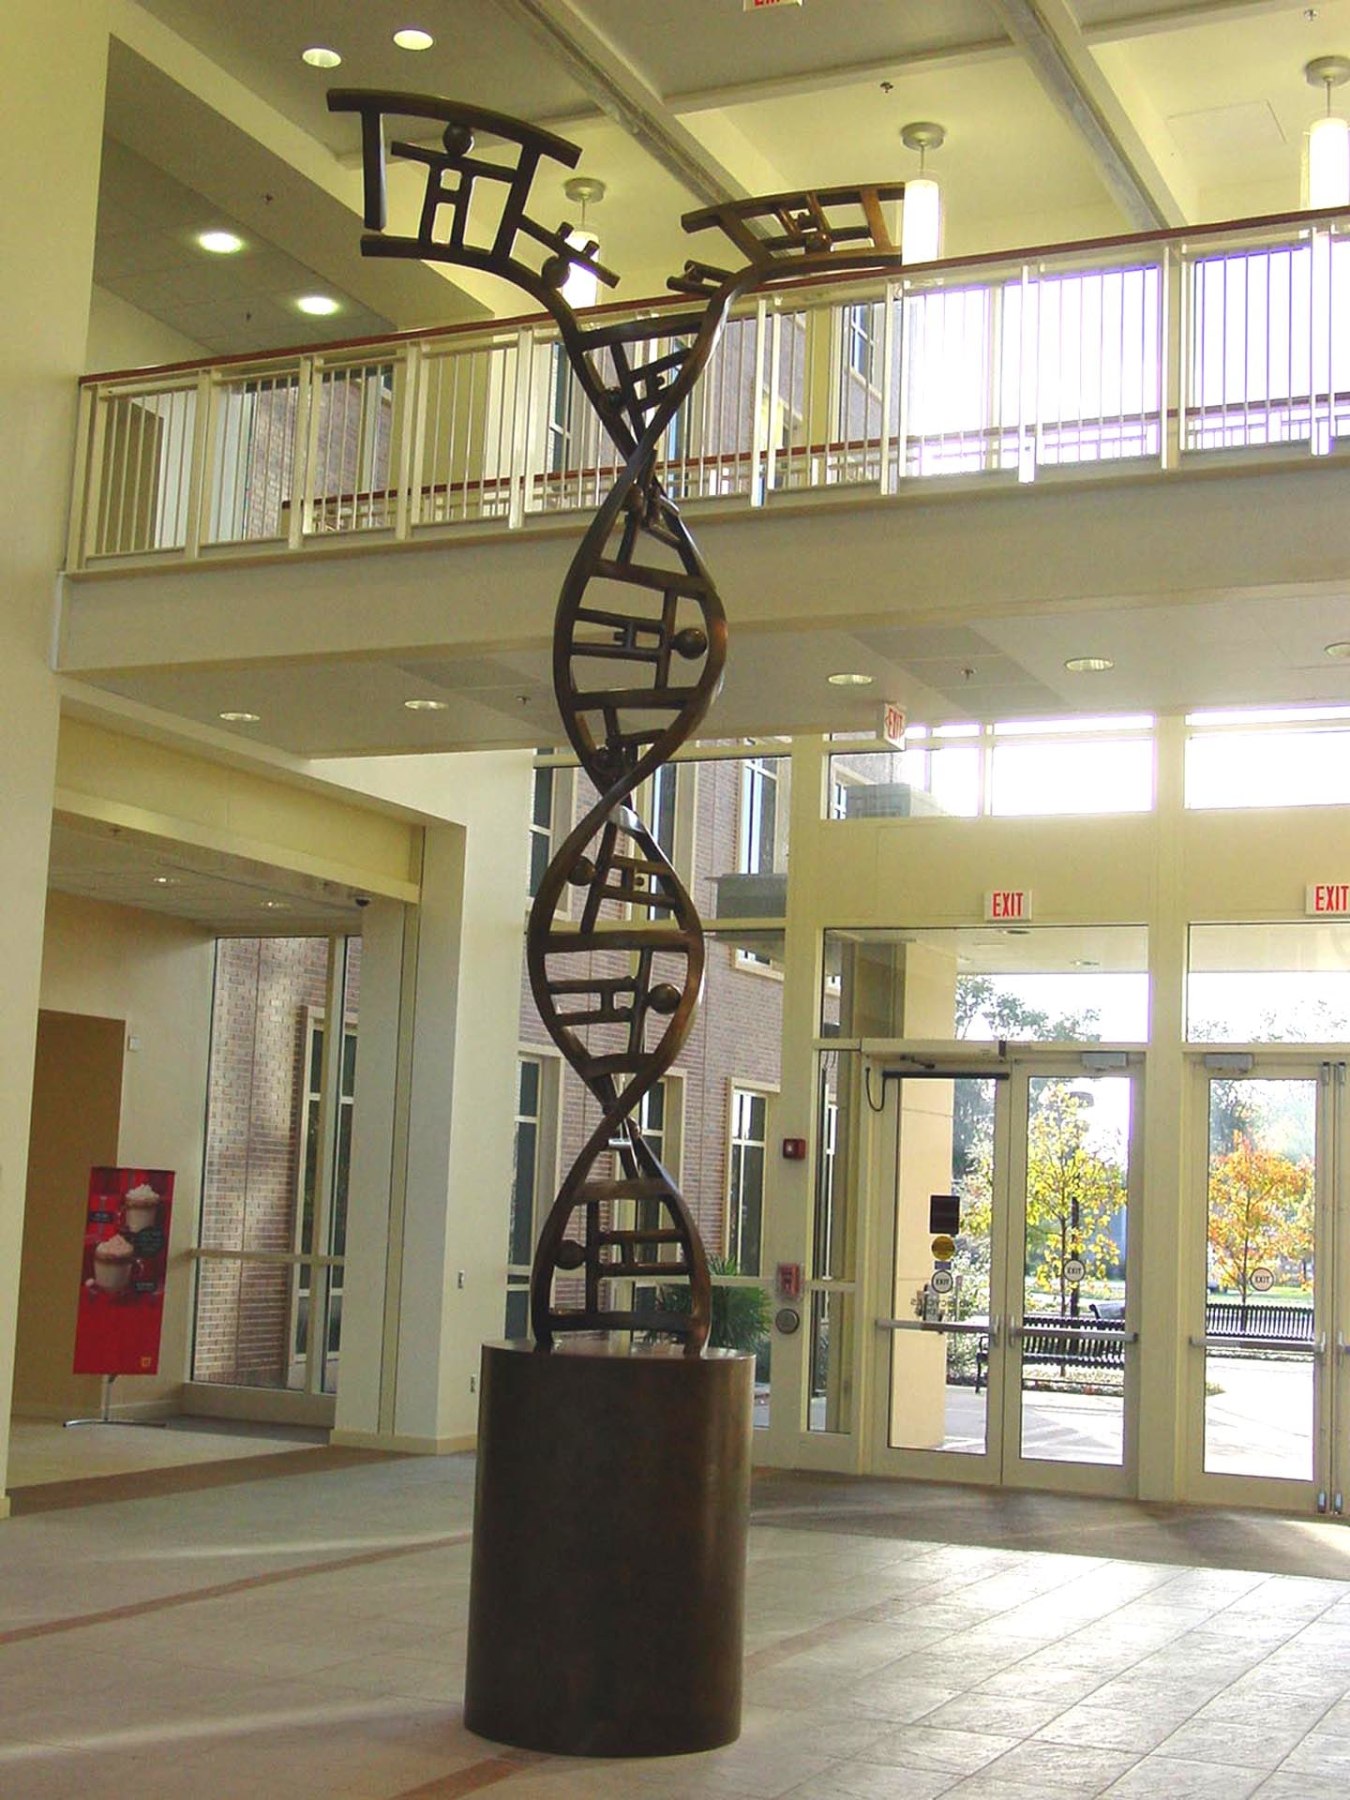 DNA, University of Florida, Genetics &amp; Cancer Research and ICBR Biotechnology Laboratories, Gainsville, FL